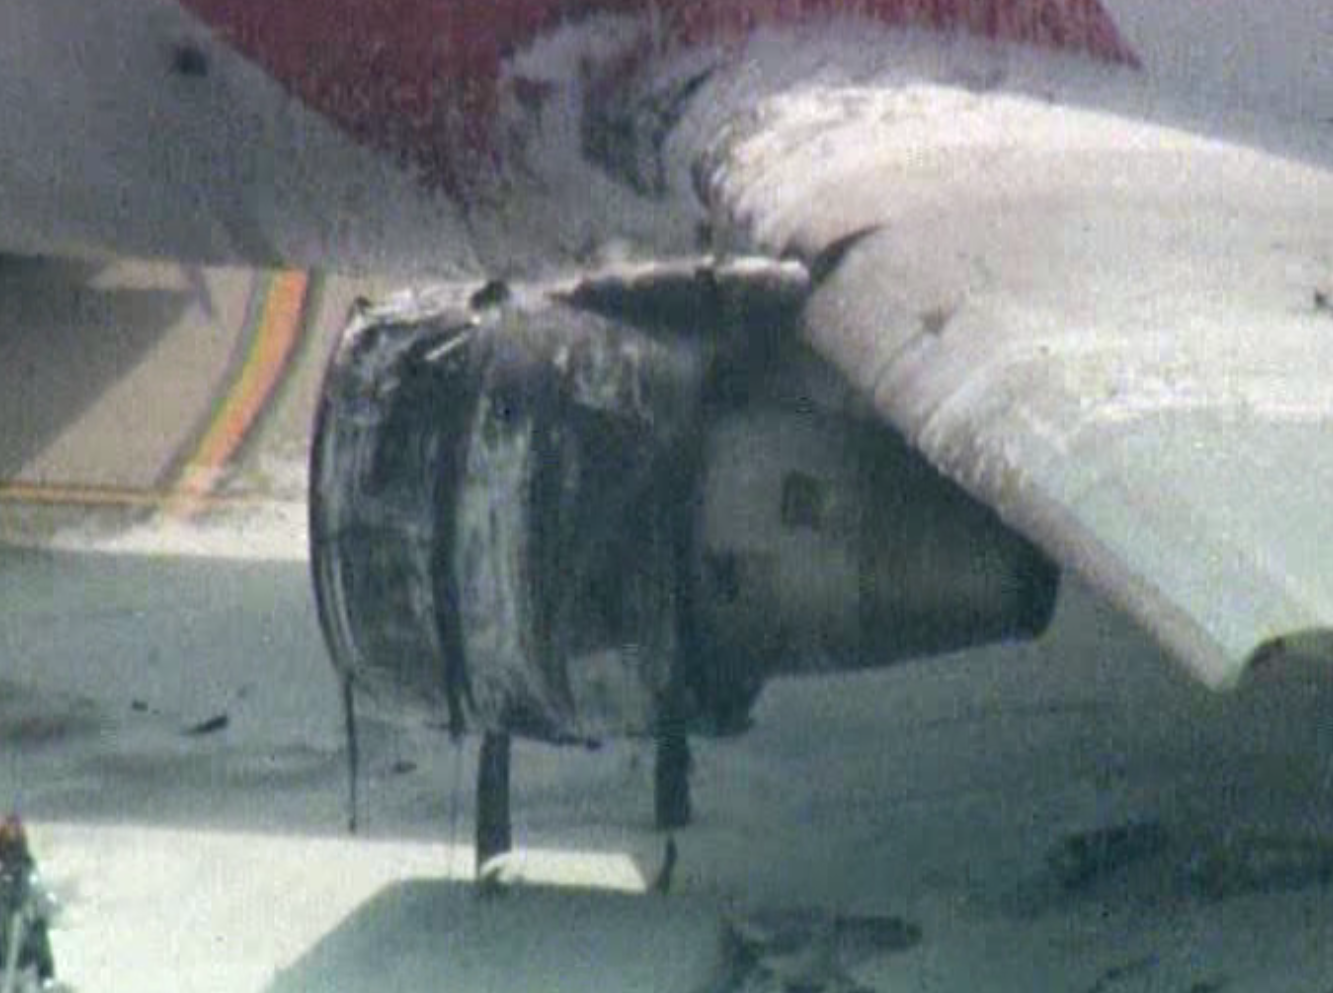 Crews were able to extinguish a fire on a plane parked at Fort Lauderdale-Hollywood International Airport on Oct. 29, 2015. (Source: CBS4) 